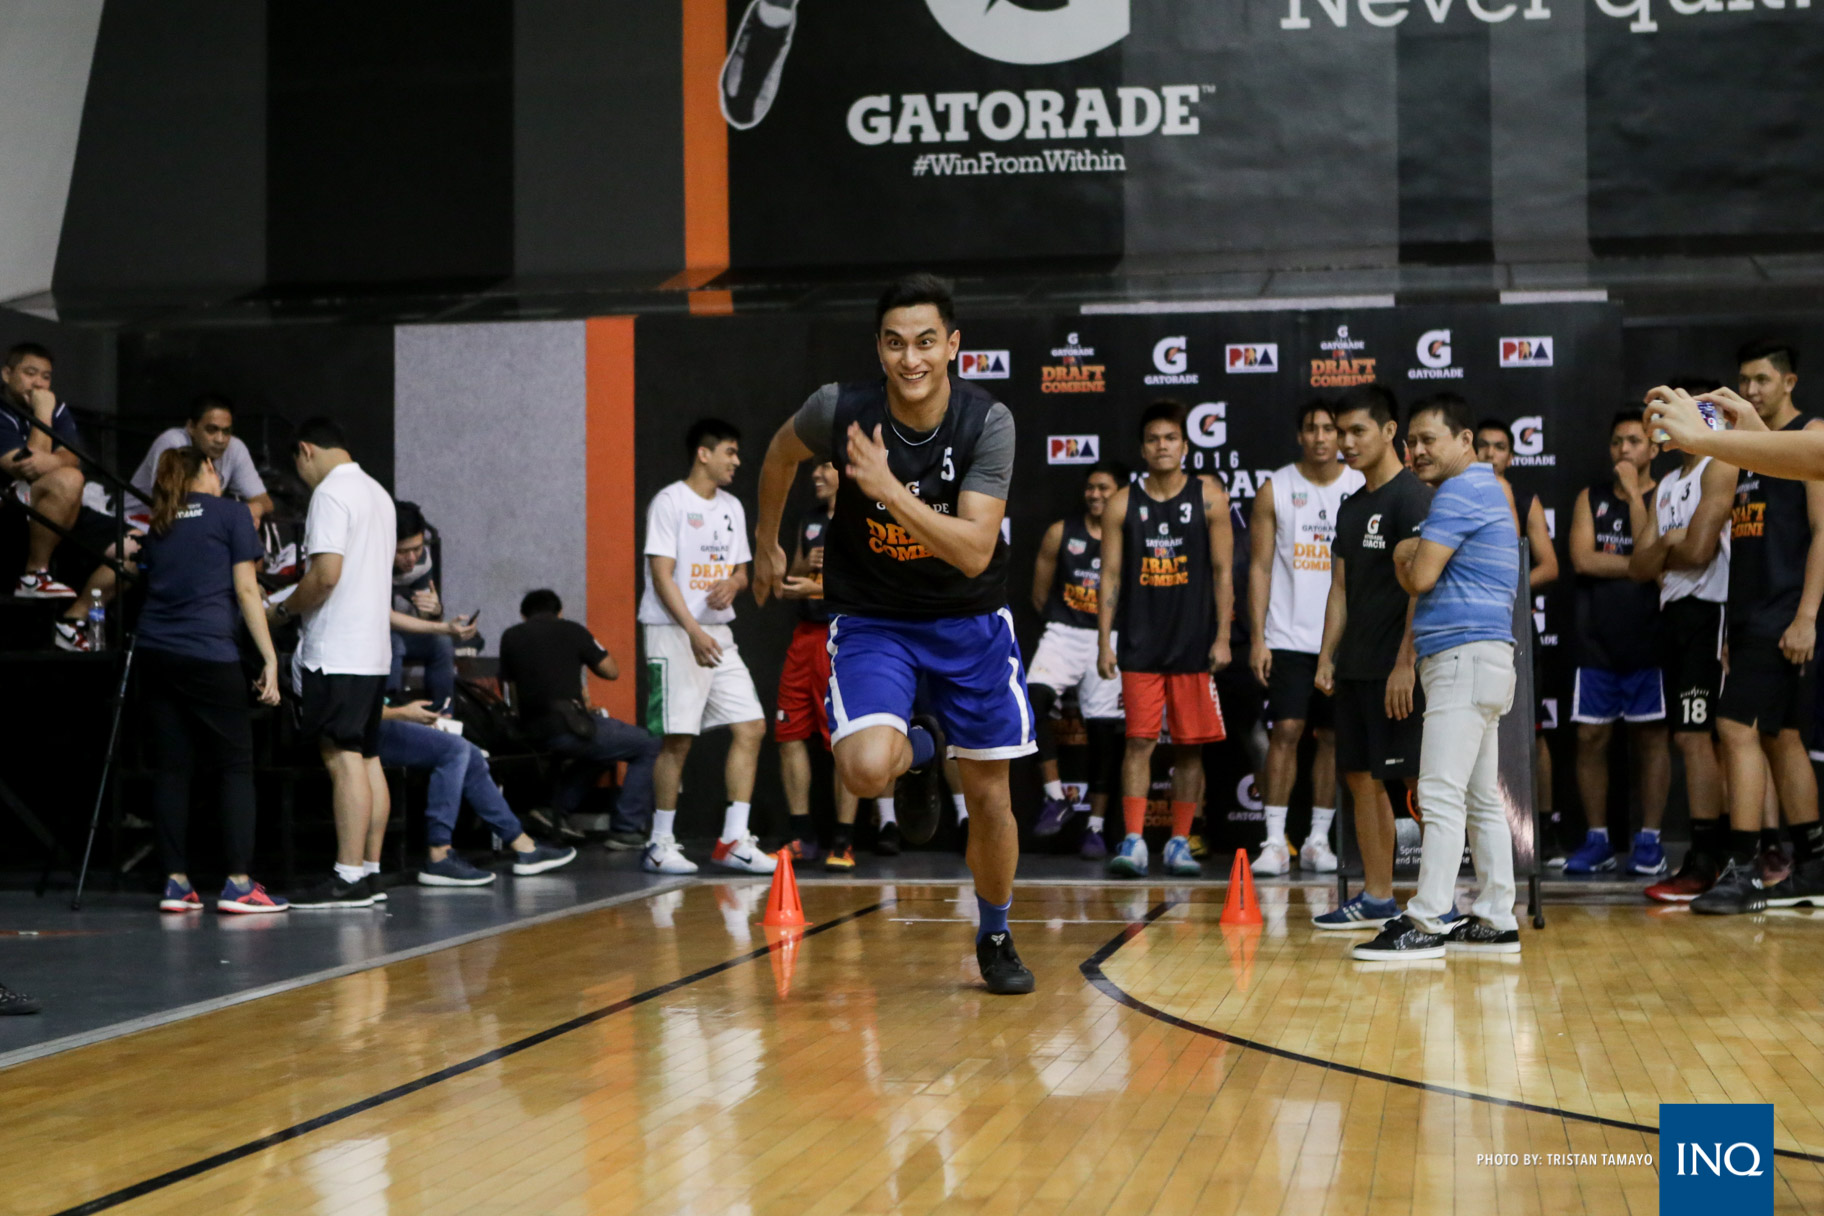 Russel Escoto goes through a drill at the 2016 PBA Rookie Draft Combine. Photo by Tristan Tamayo/INQUIRER.net